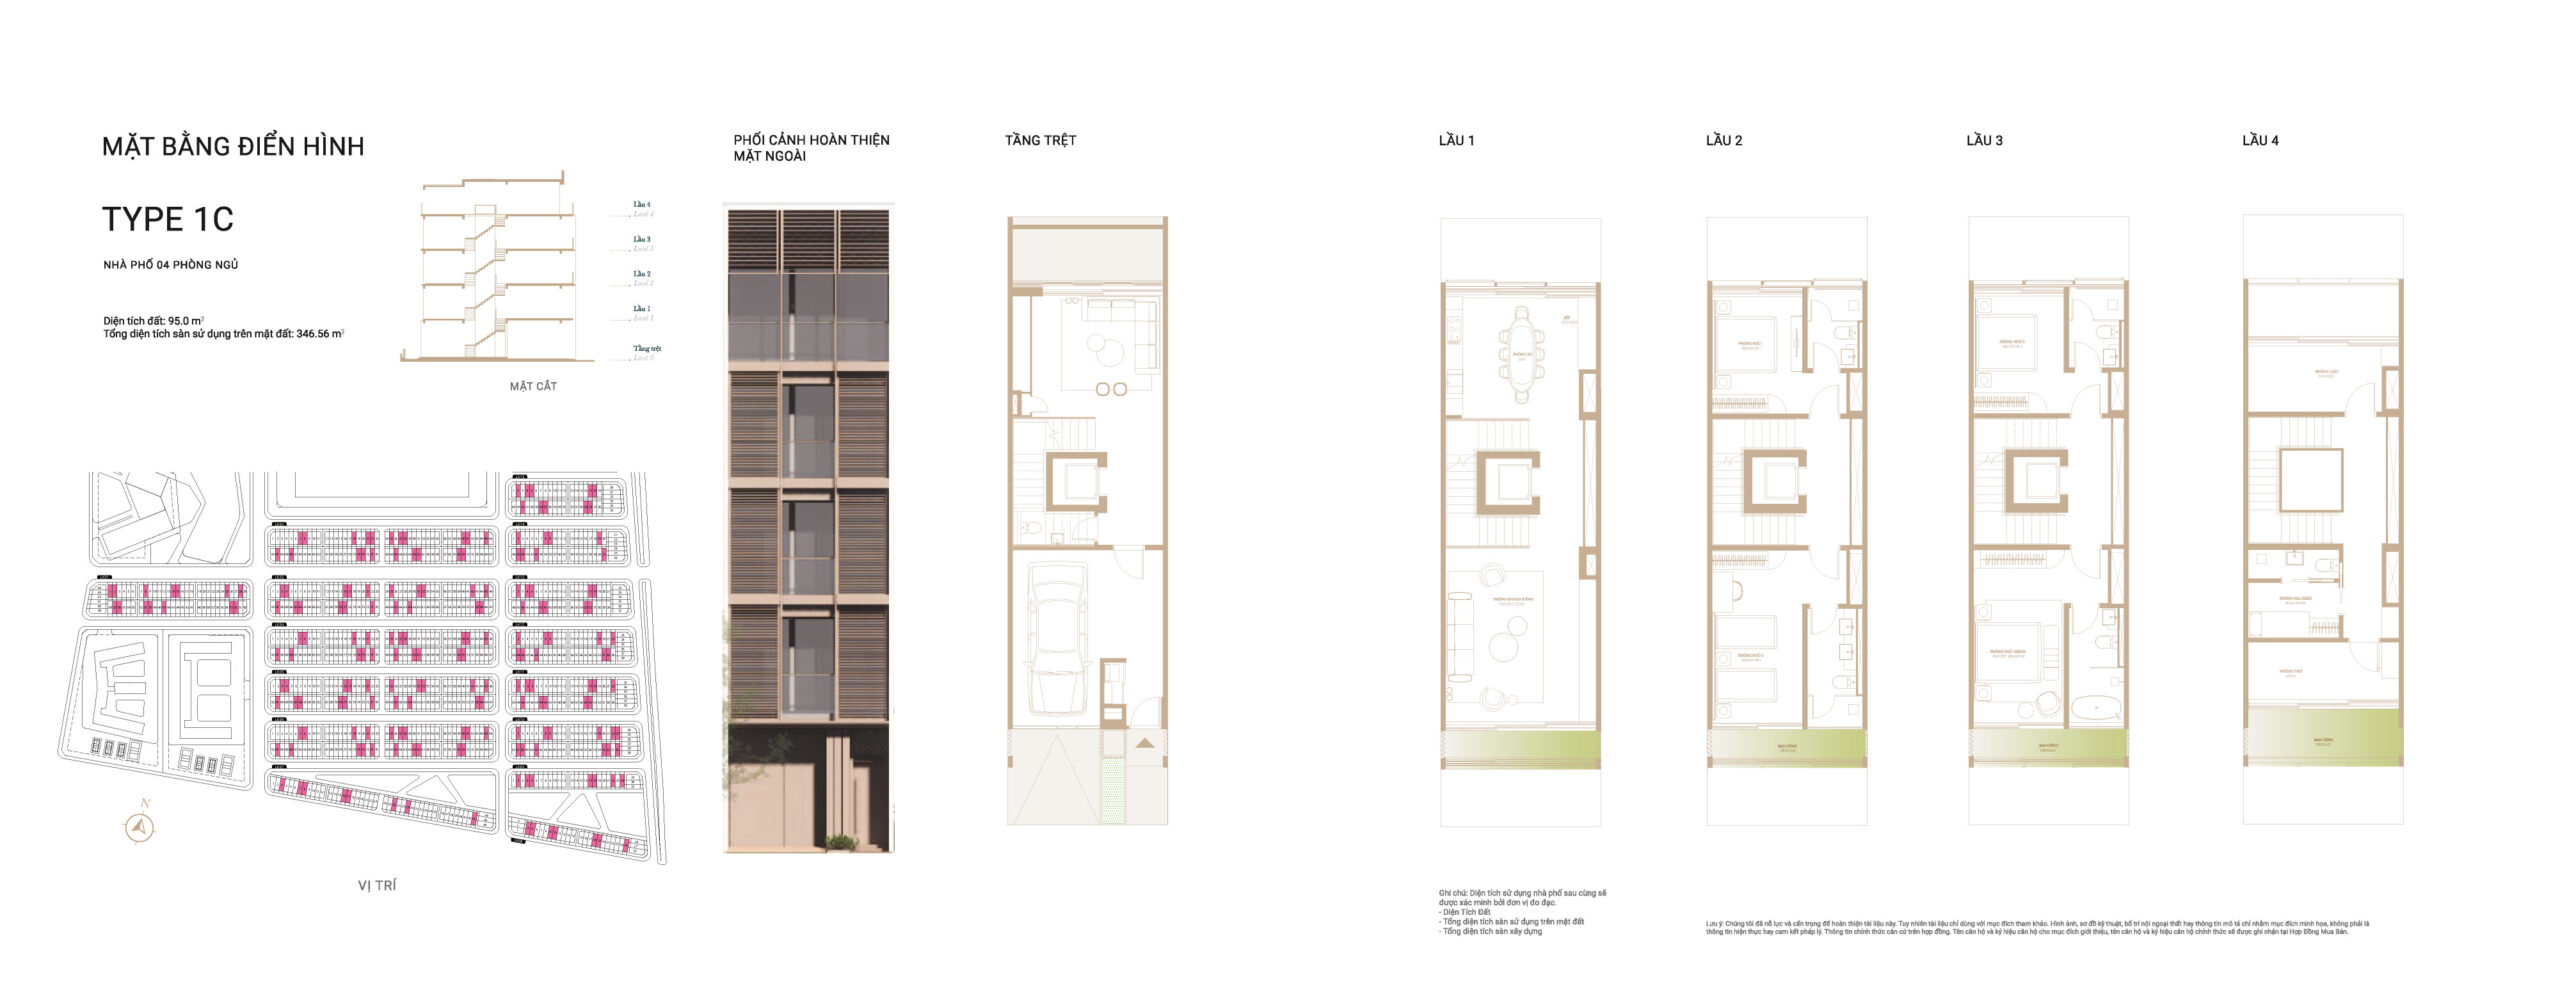 layout-mb-shophouse-1c-the-global-city